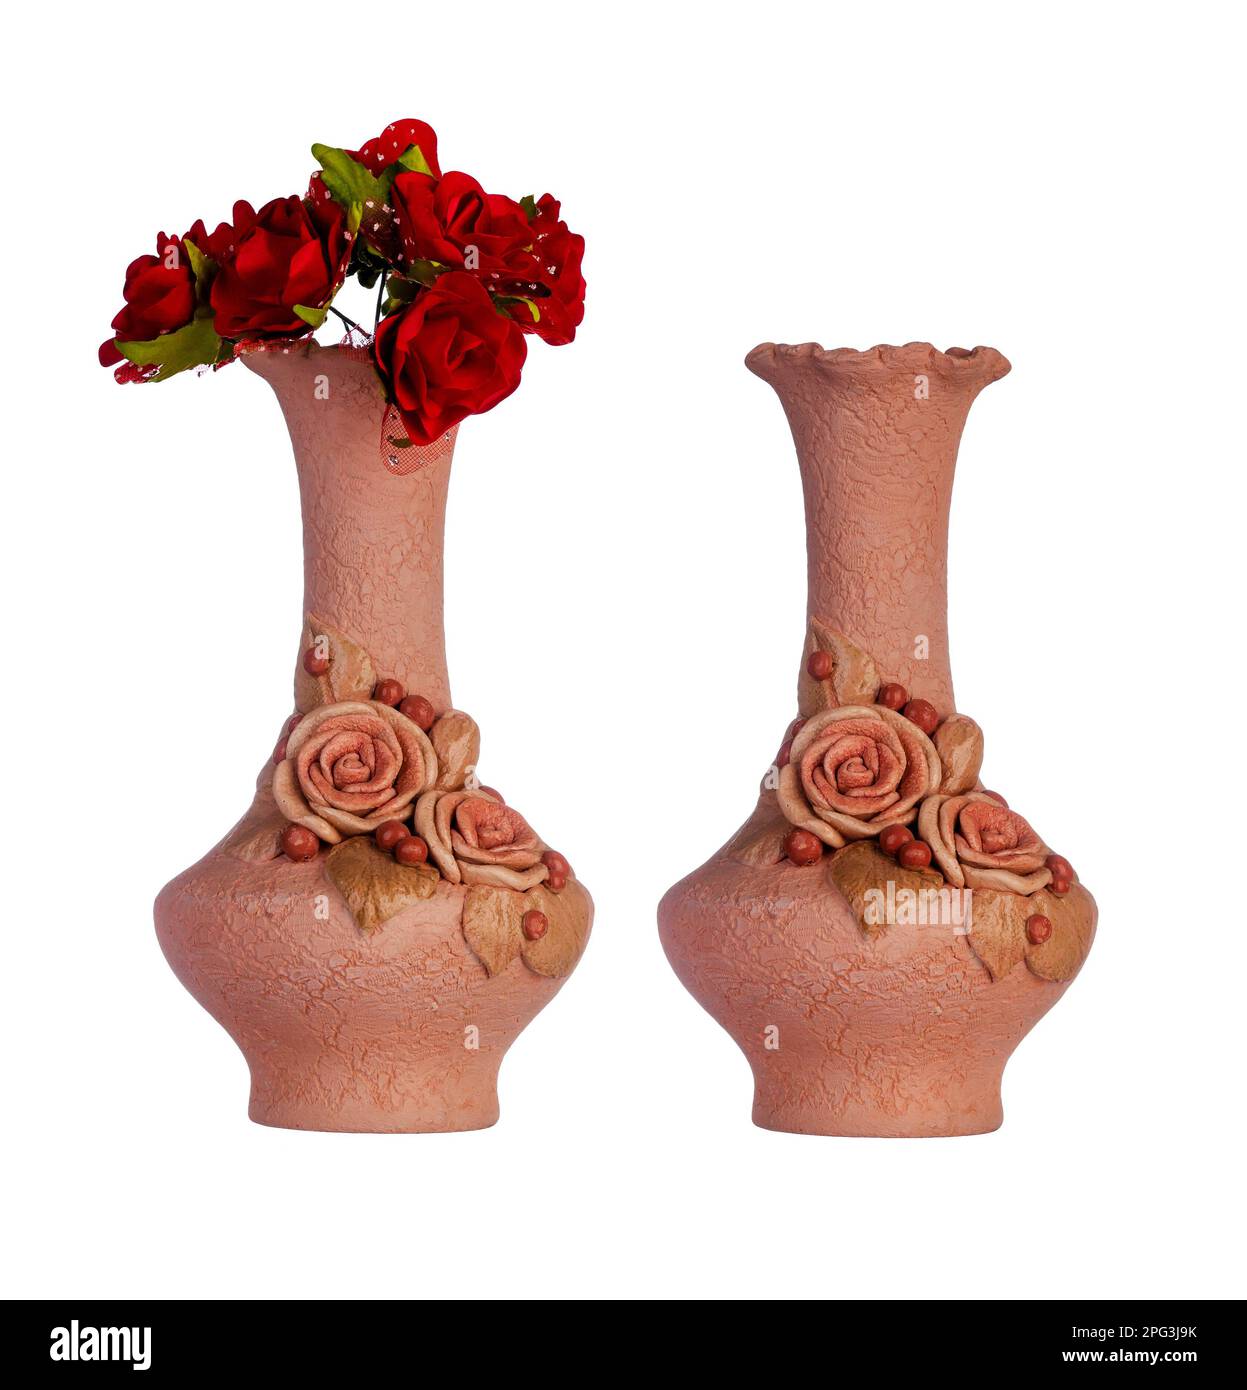 Ceramic vase with artificial flowers Stock Photo